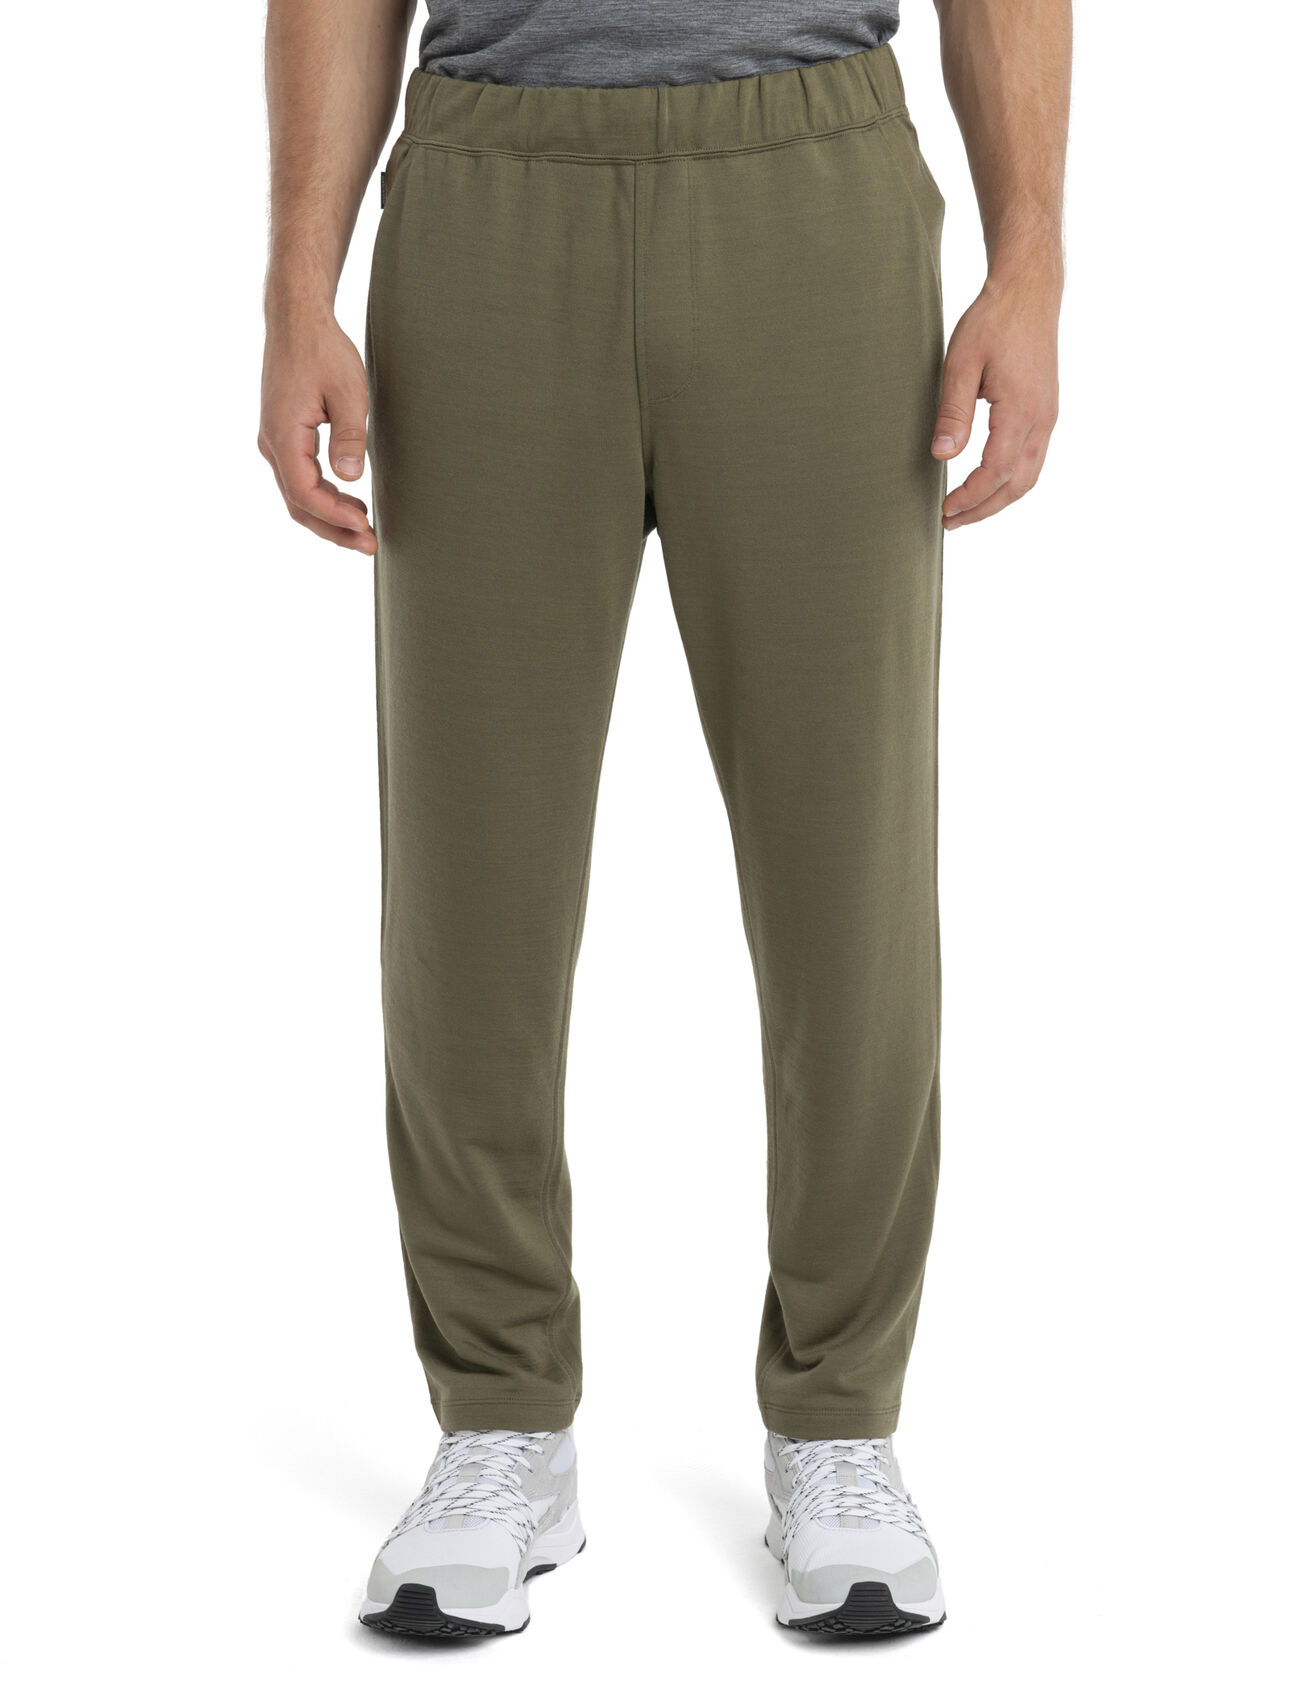 Mens Merino Blend Shifter II Straight Pants The ultimate before and after bottoms made with our Eucaform terry fabric that blends merino wool and TENCEL™ Lyocell, the Shifter II Straight Pants have down time covered.